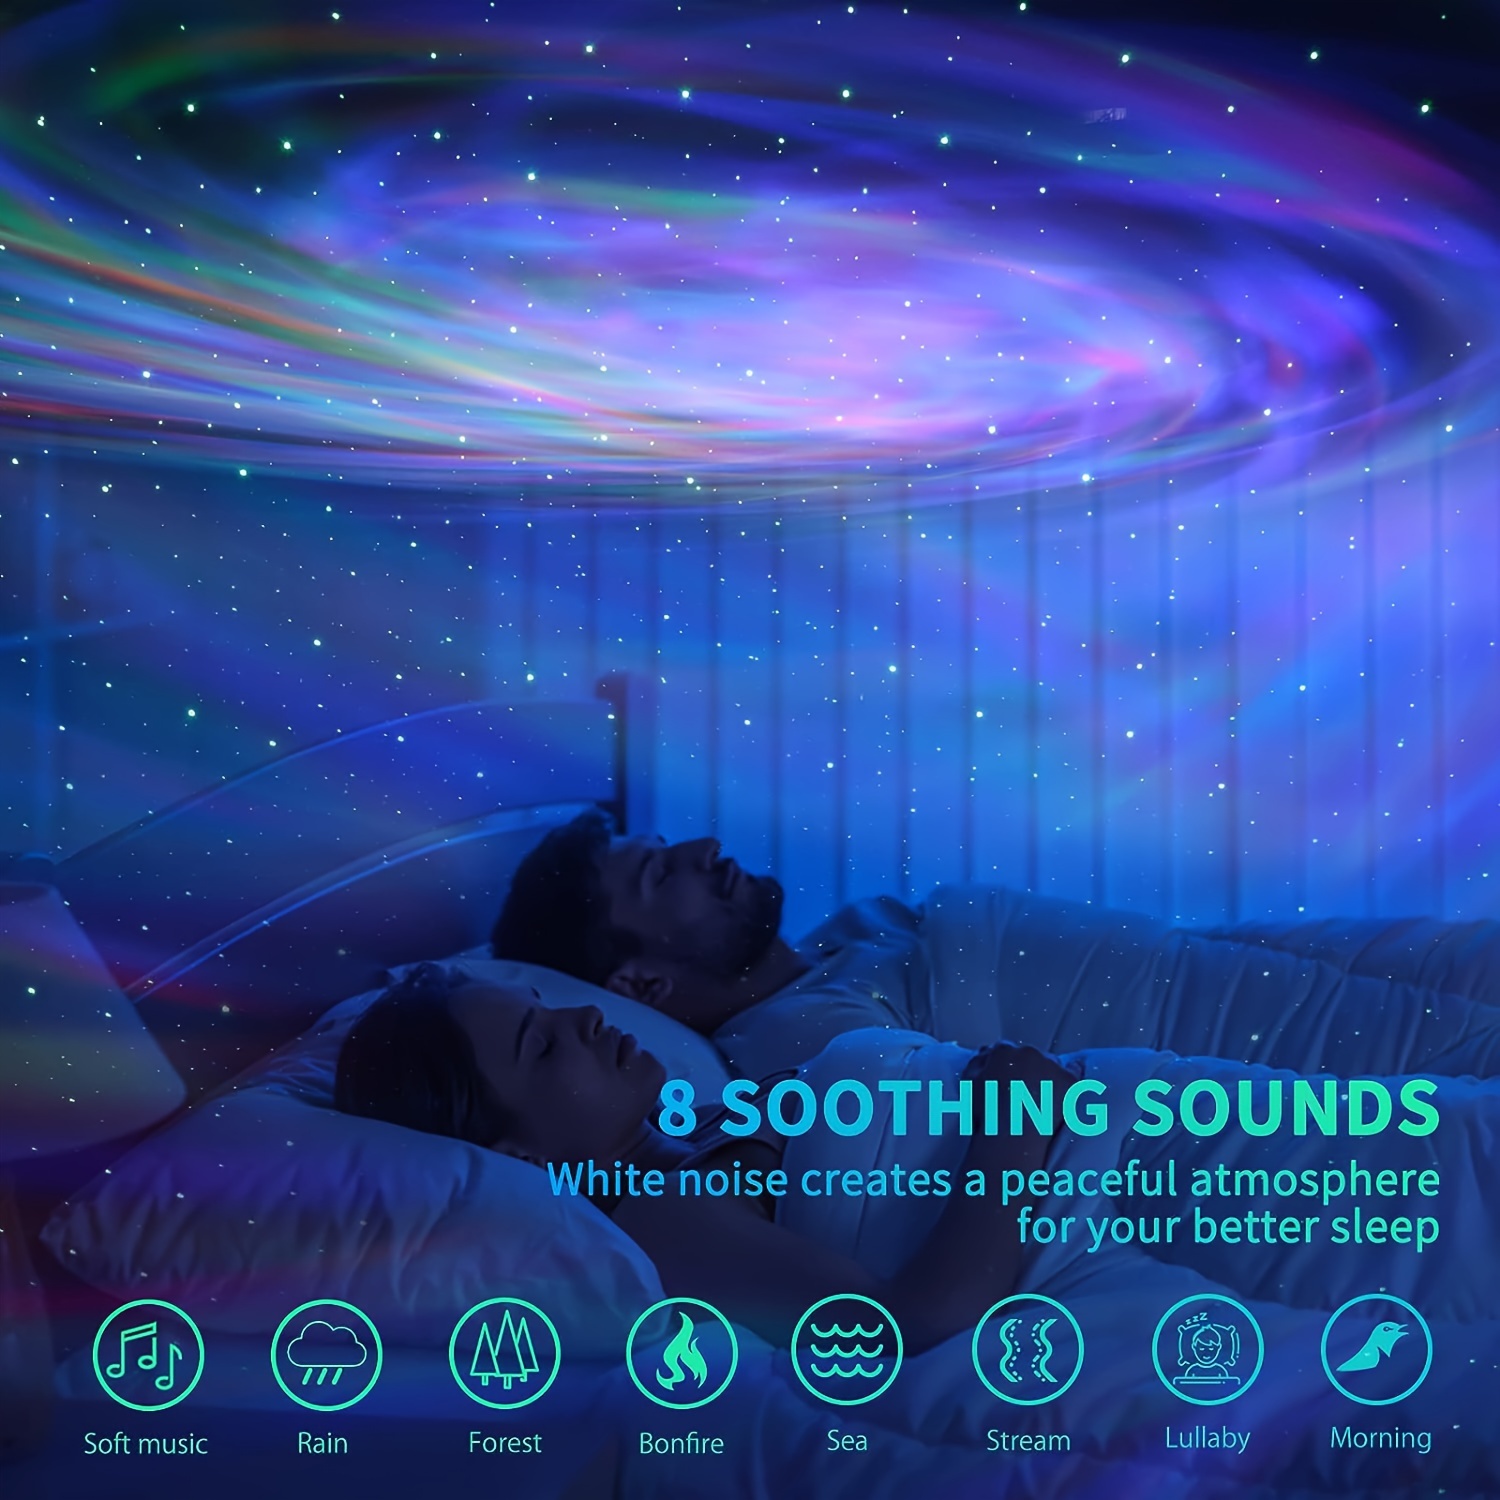 LED Star Projector Galaxy Projector Light, Night Light Projector with White  Noise Soothes Sleep, Music Player for Party, Rotating Lights for Bedroom  and Room Decoration, Gifts for Kids/Adults 